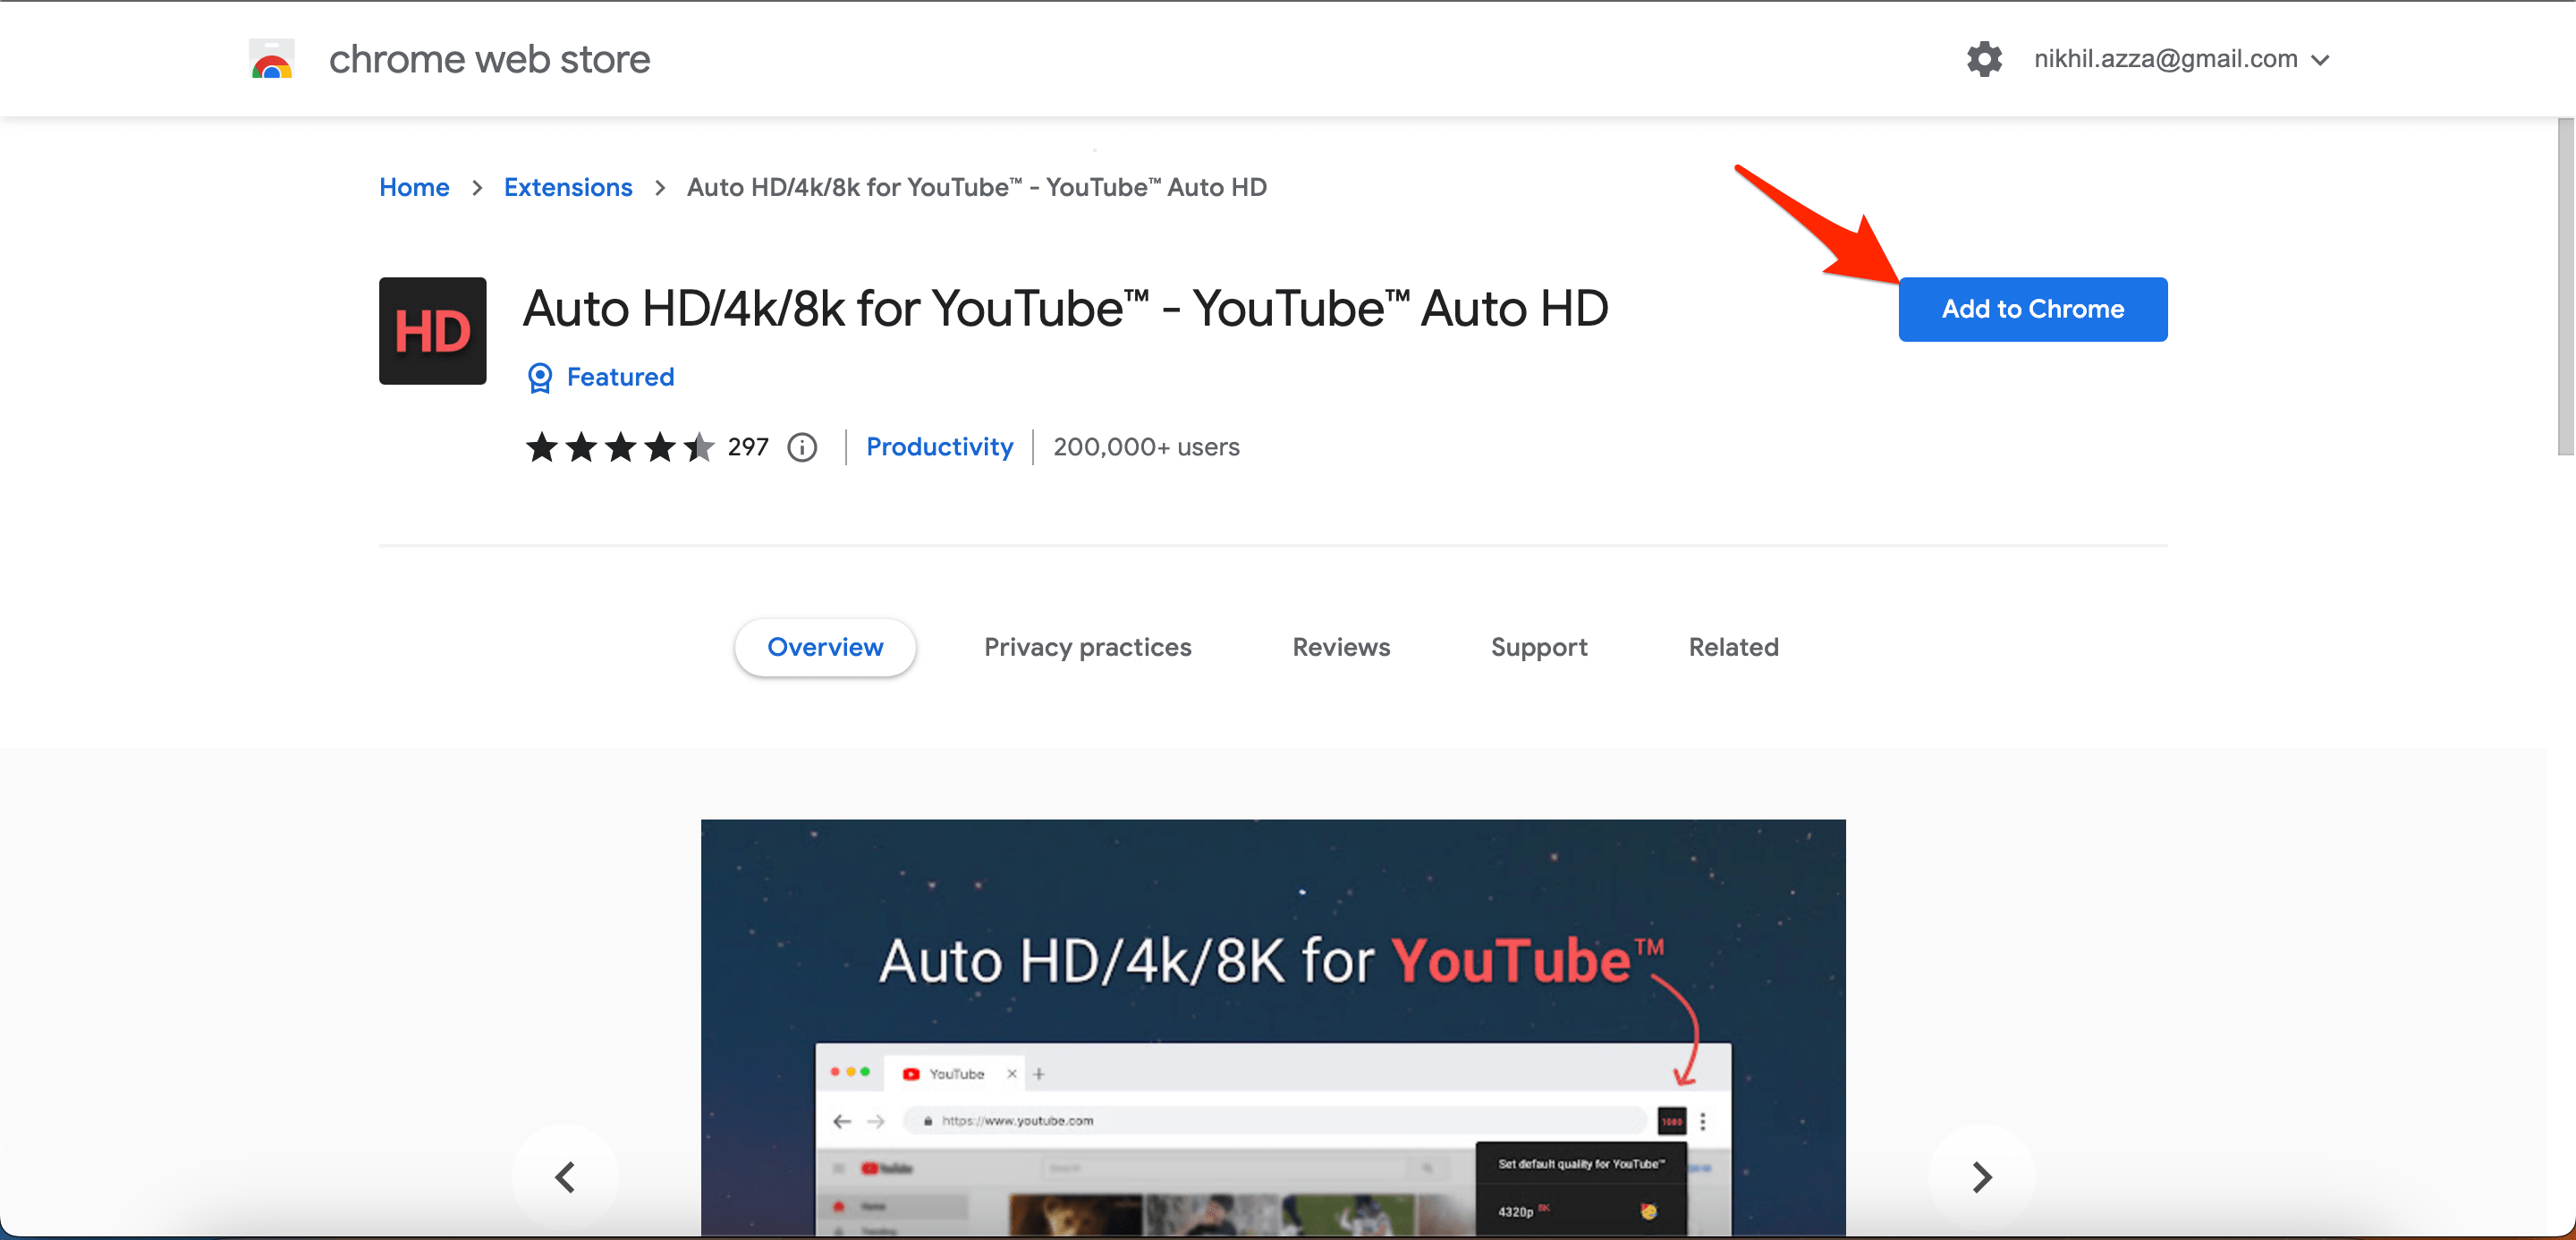 Go to Auto HD/4k/8k for YouTube